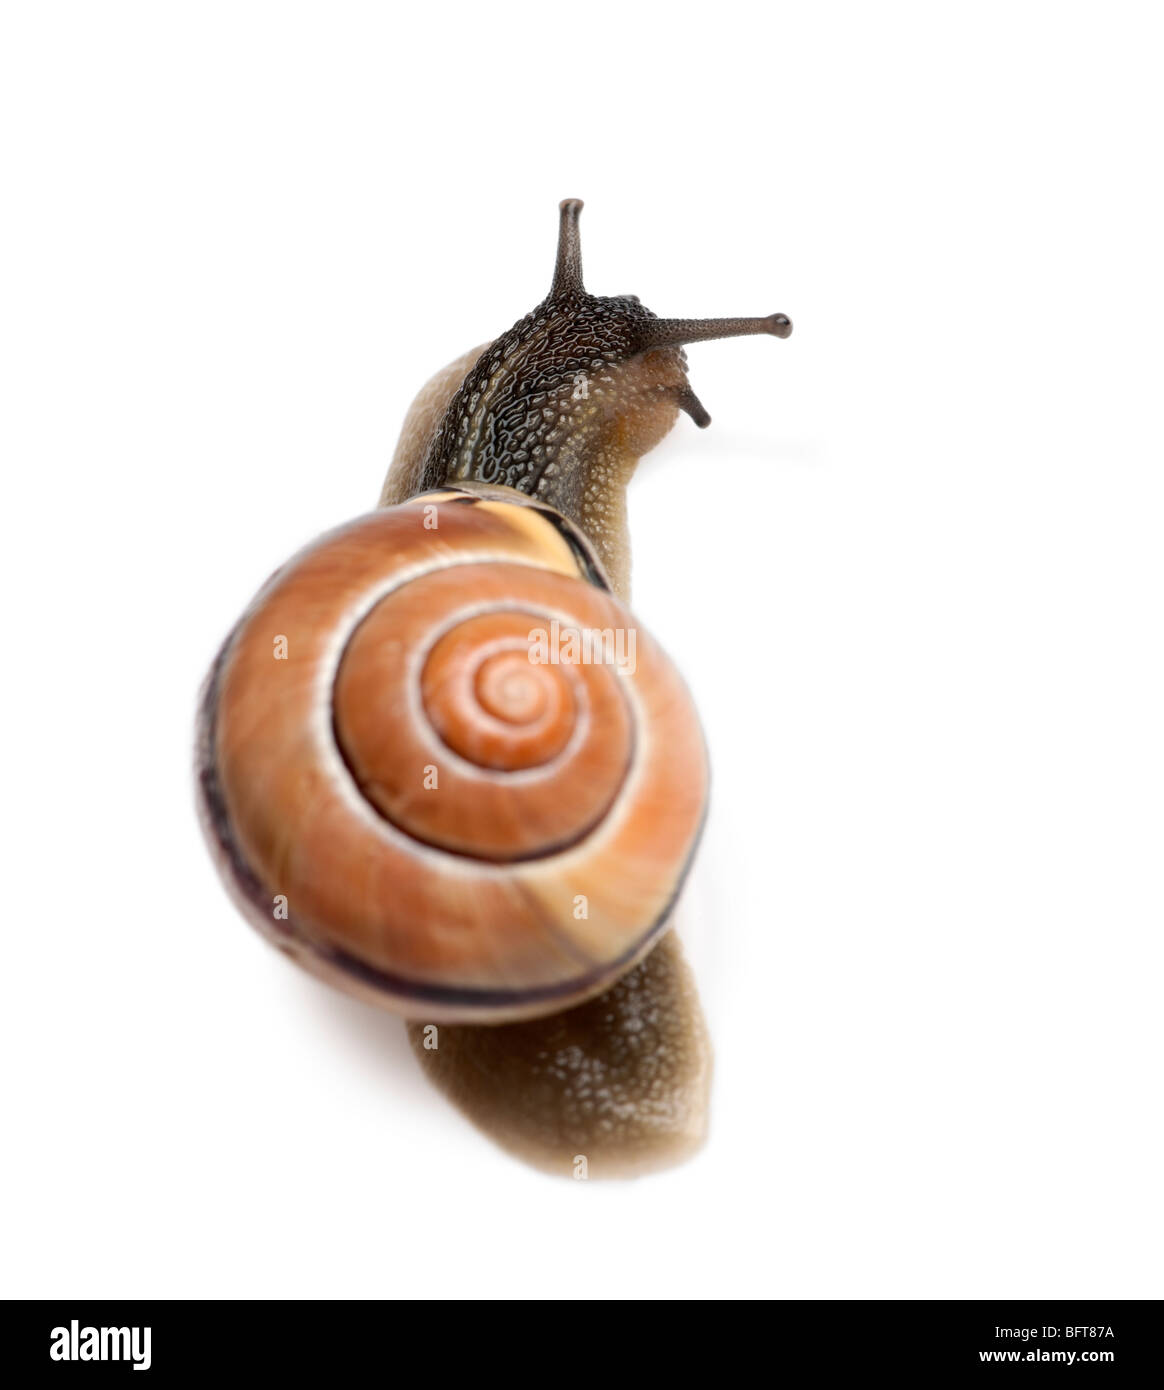 Garden snail in front of a white background, studio shot Stock Photo